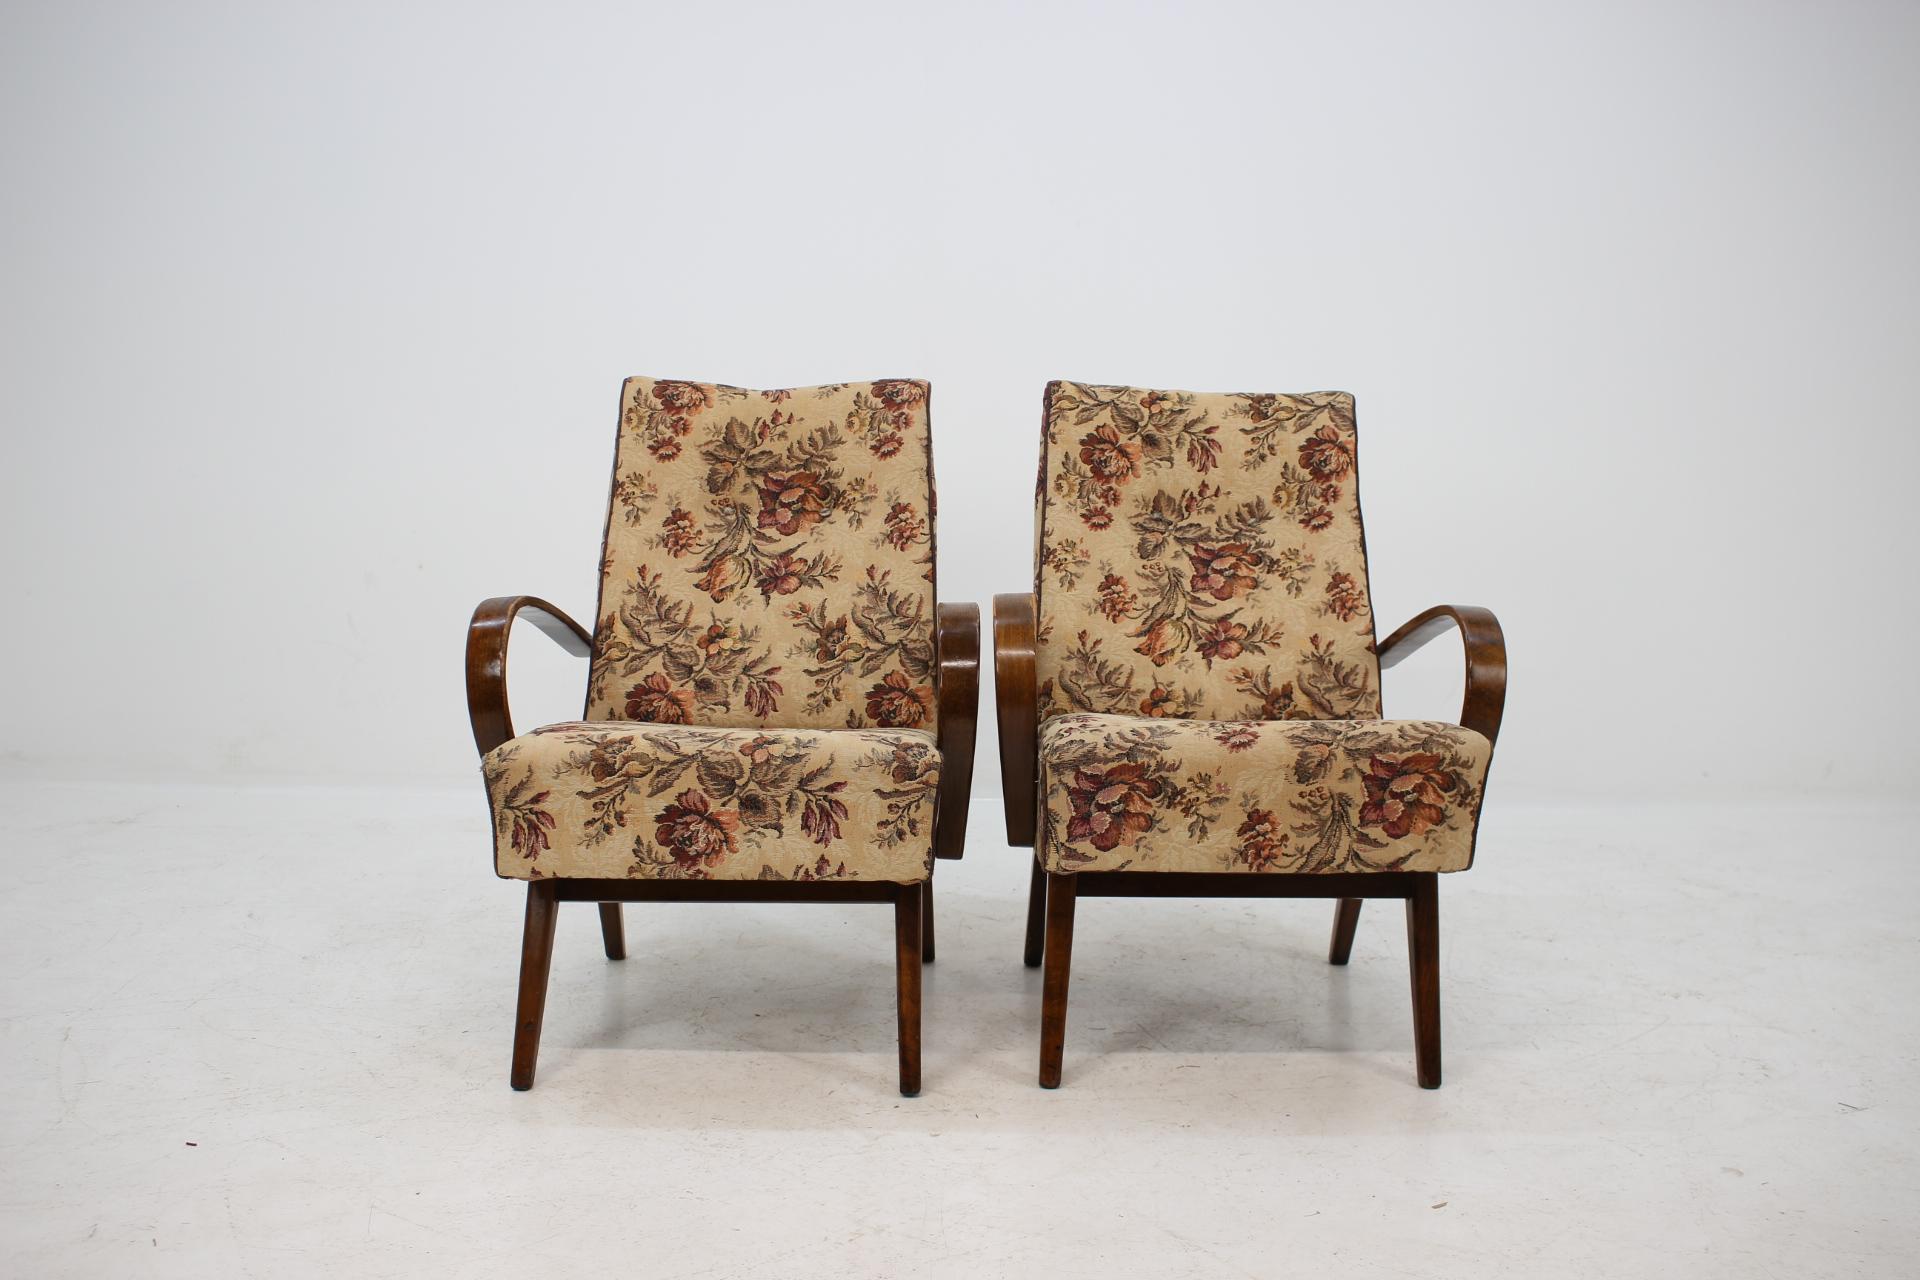 - Made in Czechoslovakia
- Made of beechwood, fabric
- Good, original condition
- Preserved original upholstery.